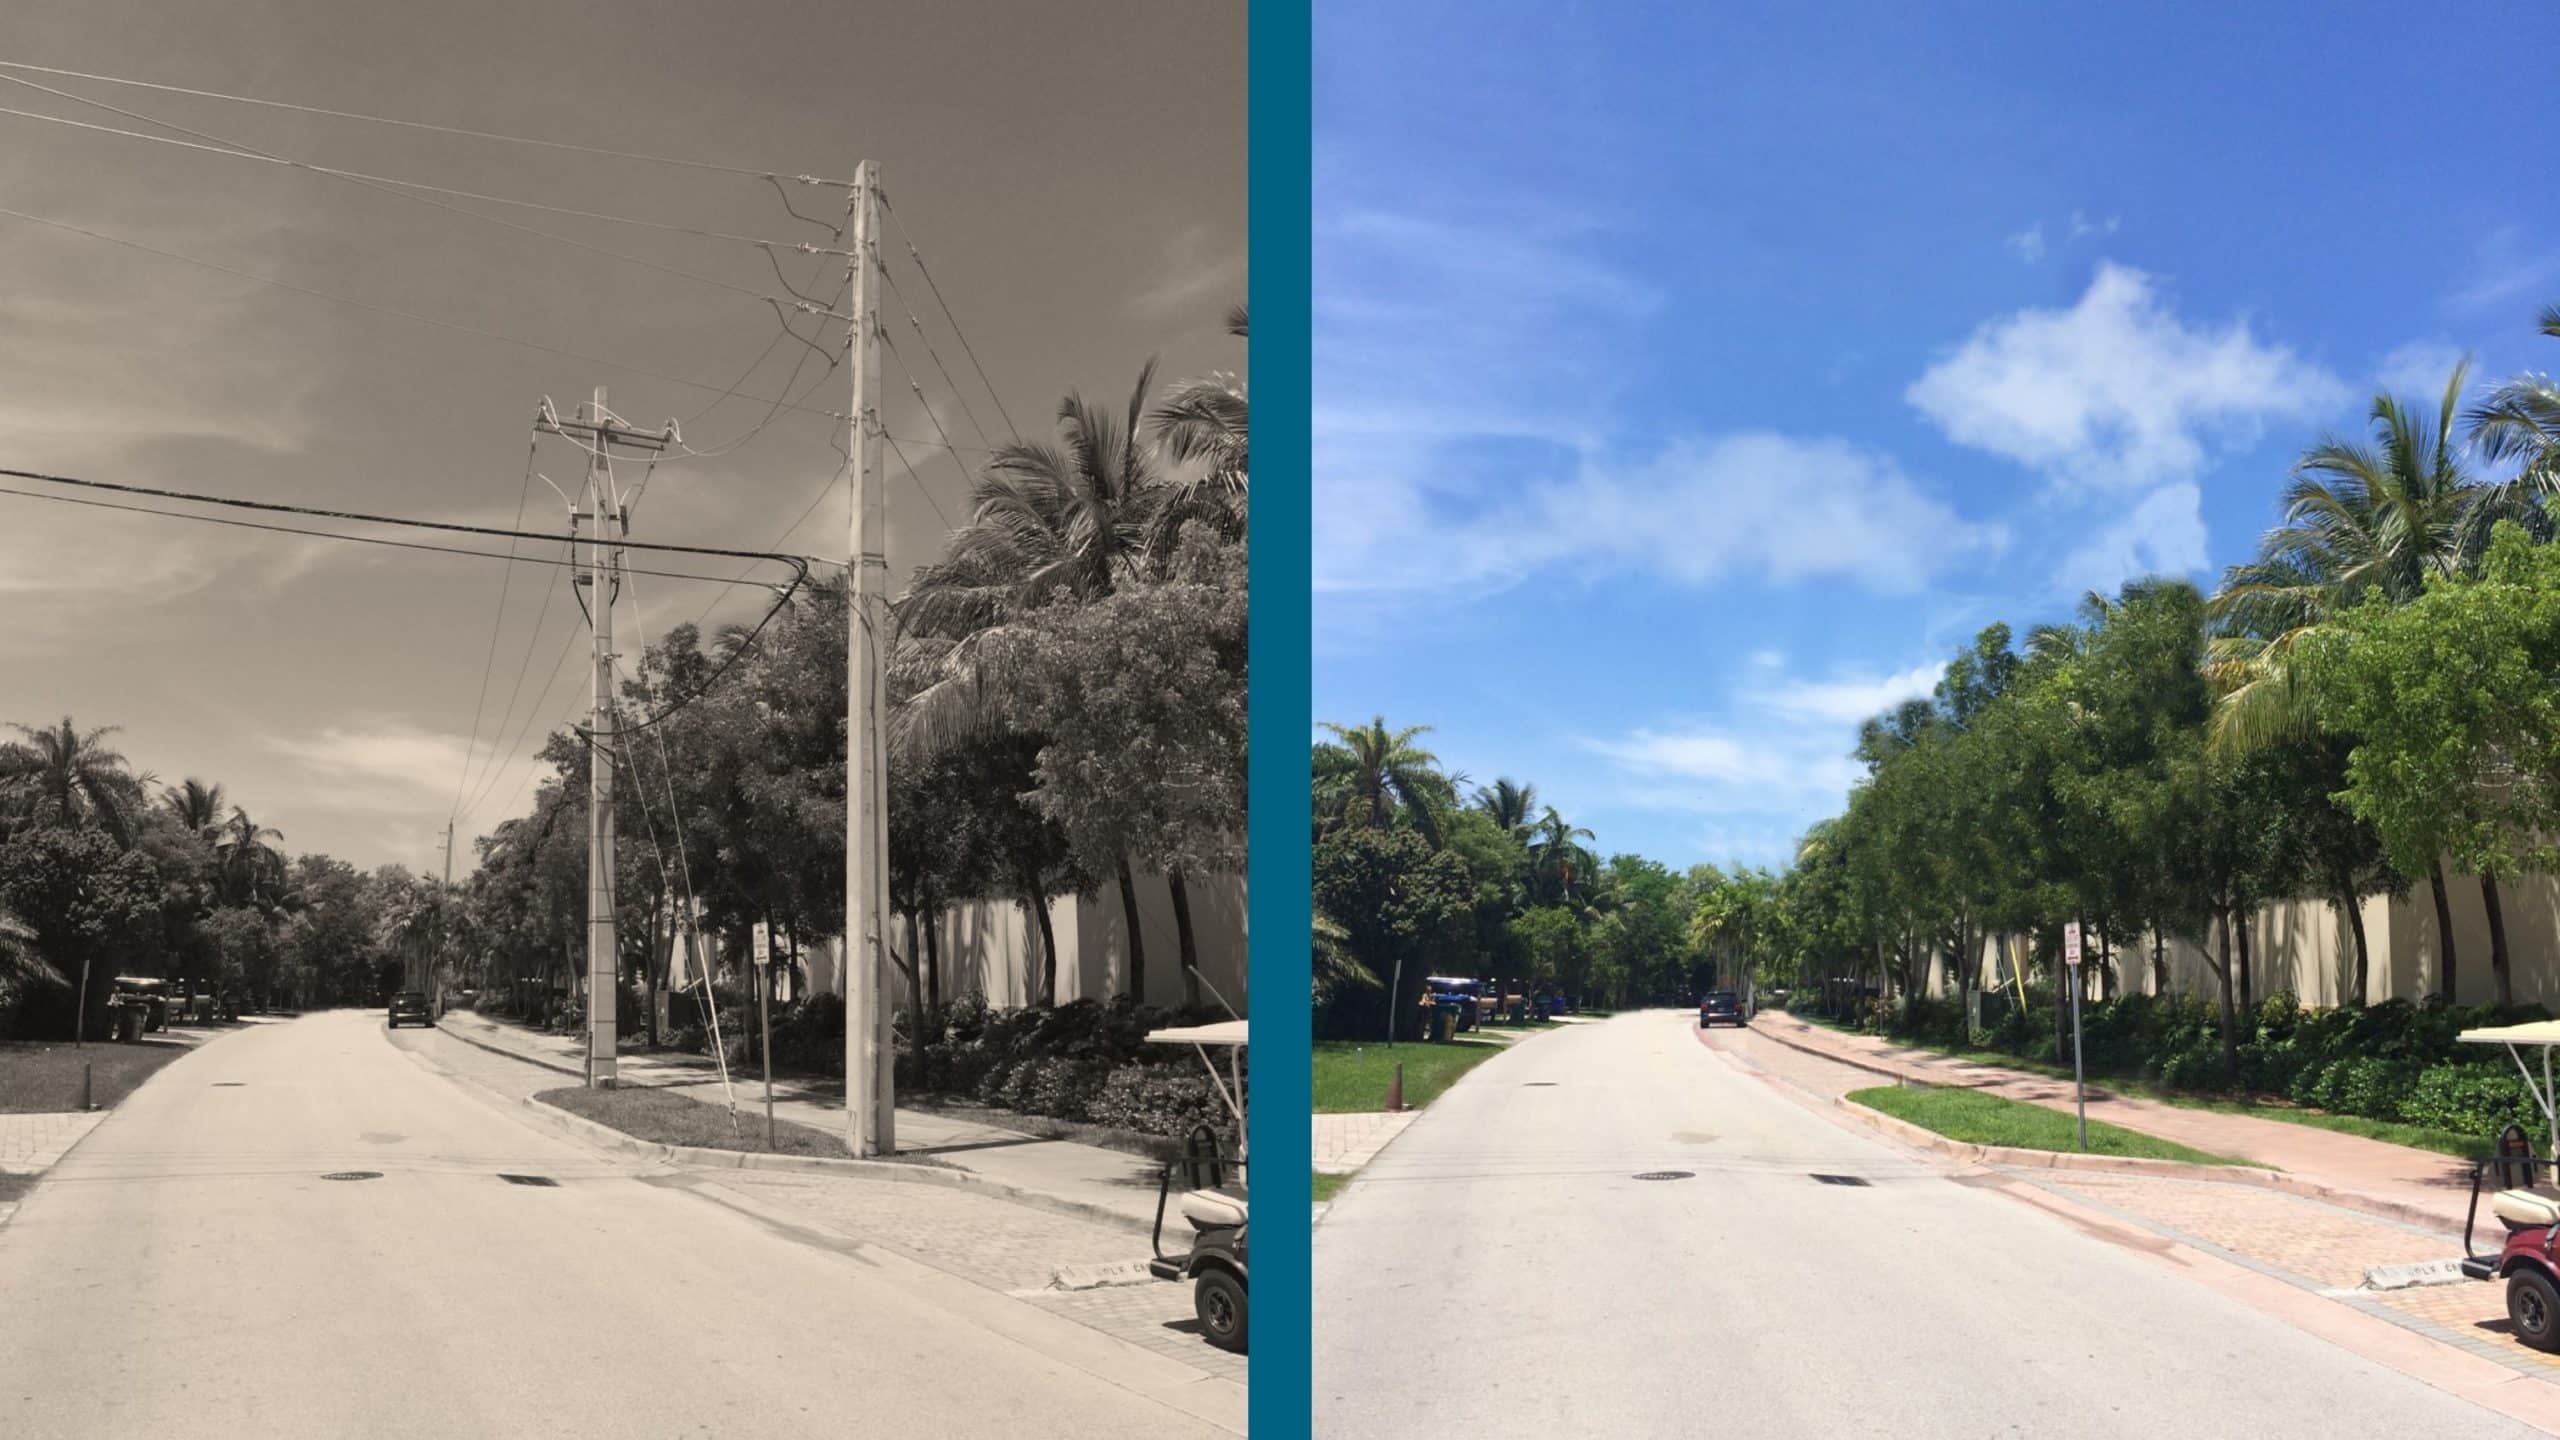 Undergrounding power lines before and after